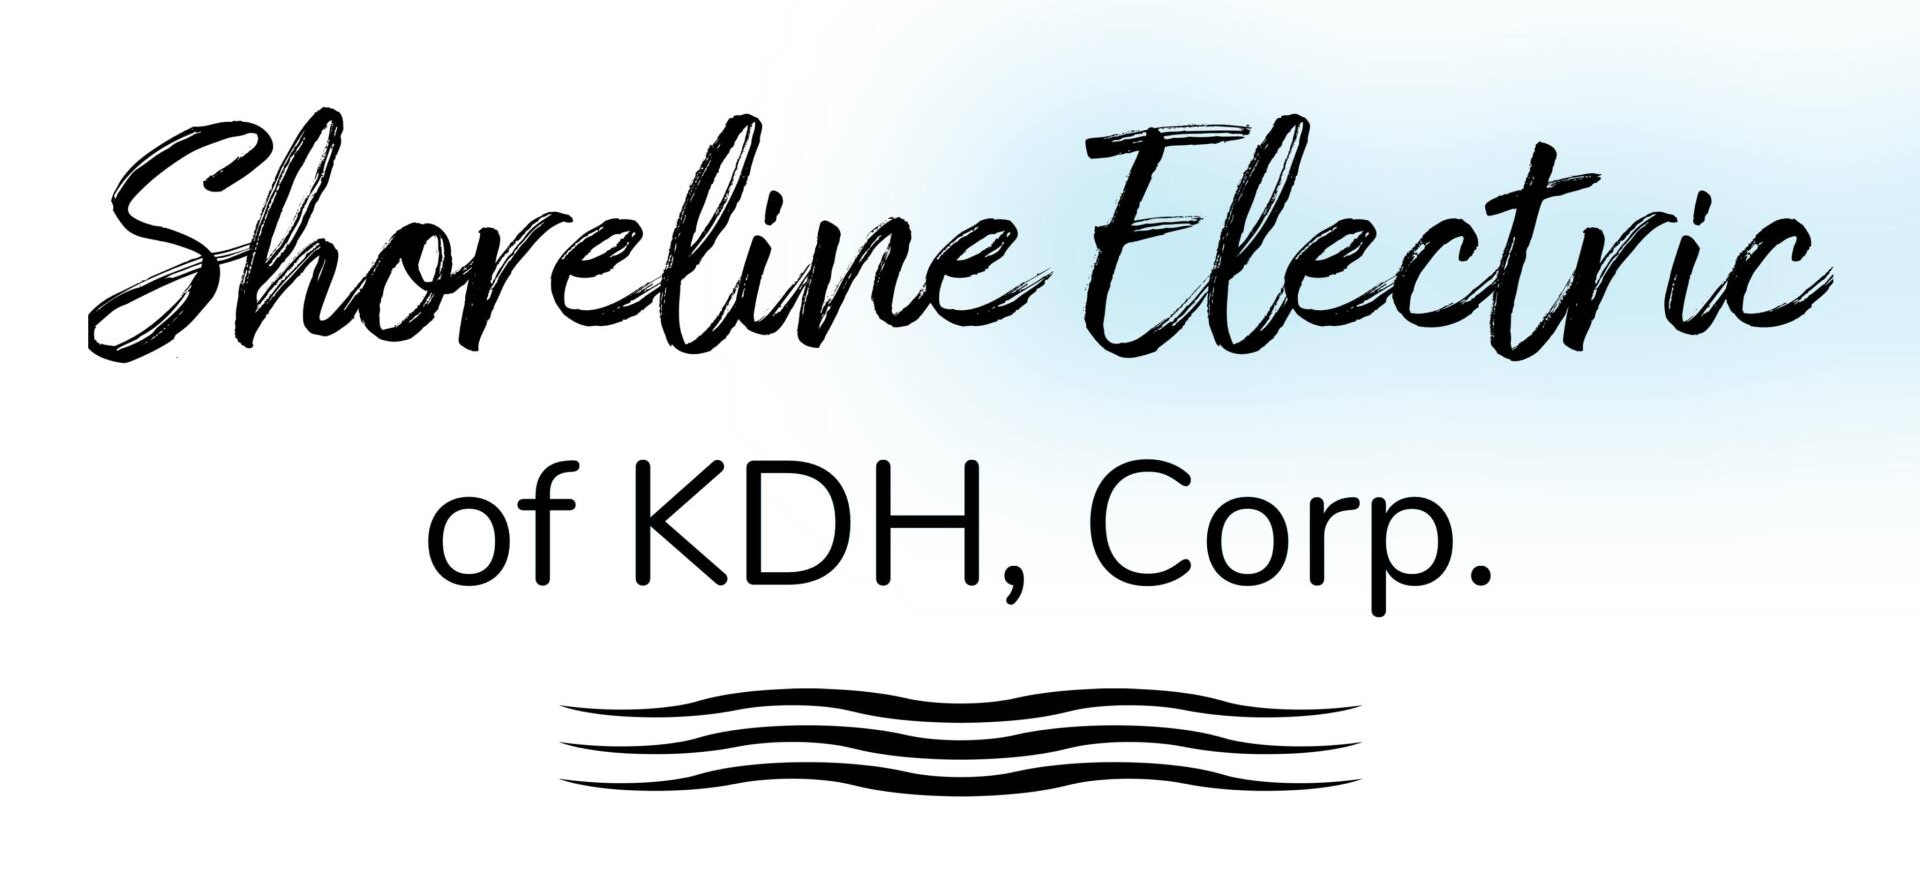 Shoreline Electric of KDH Corp